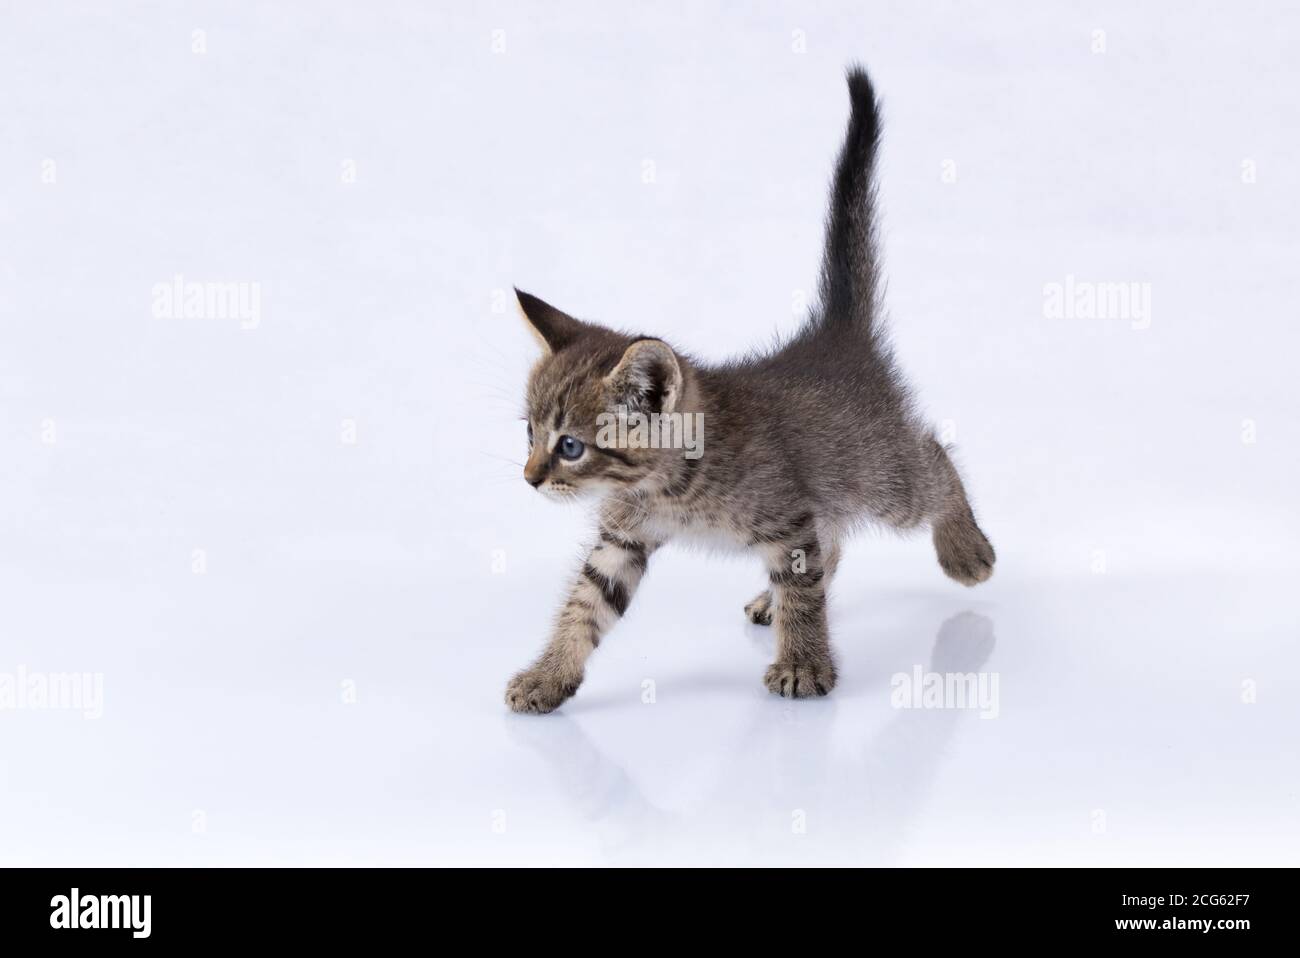 Domestic Tabby Kitten walking on a reflective surface isolated on white Stock Photo